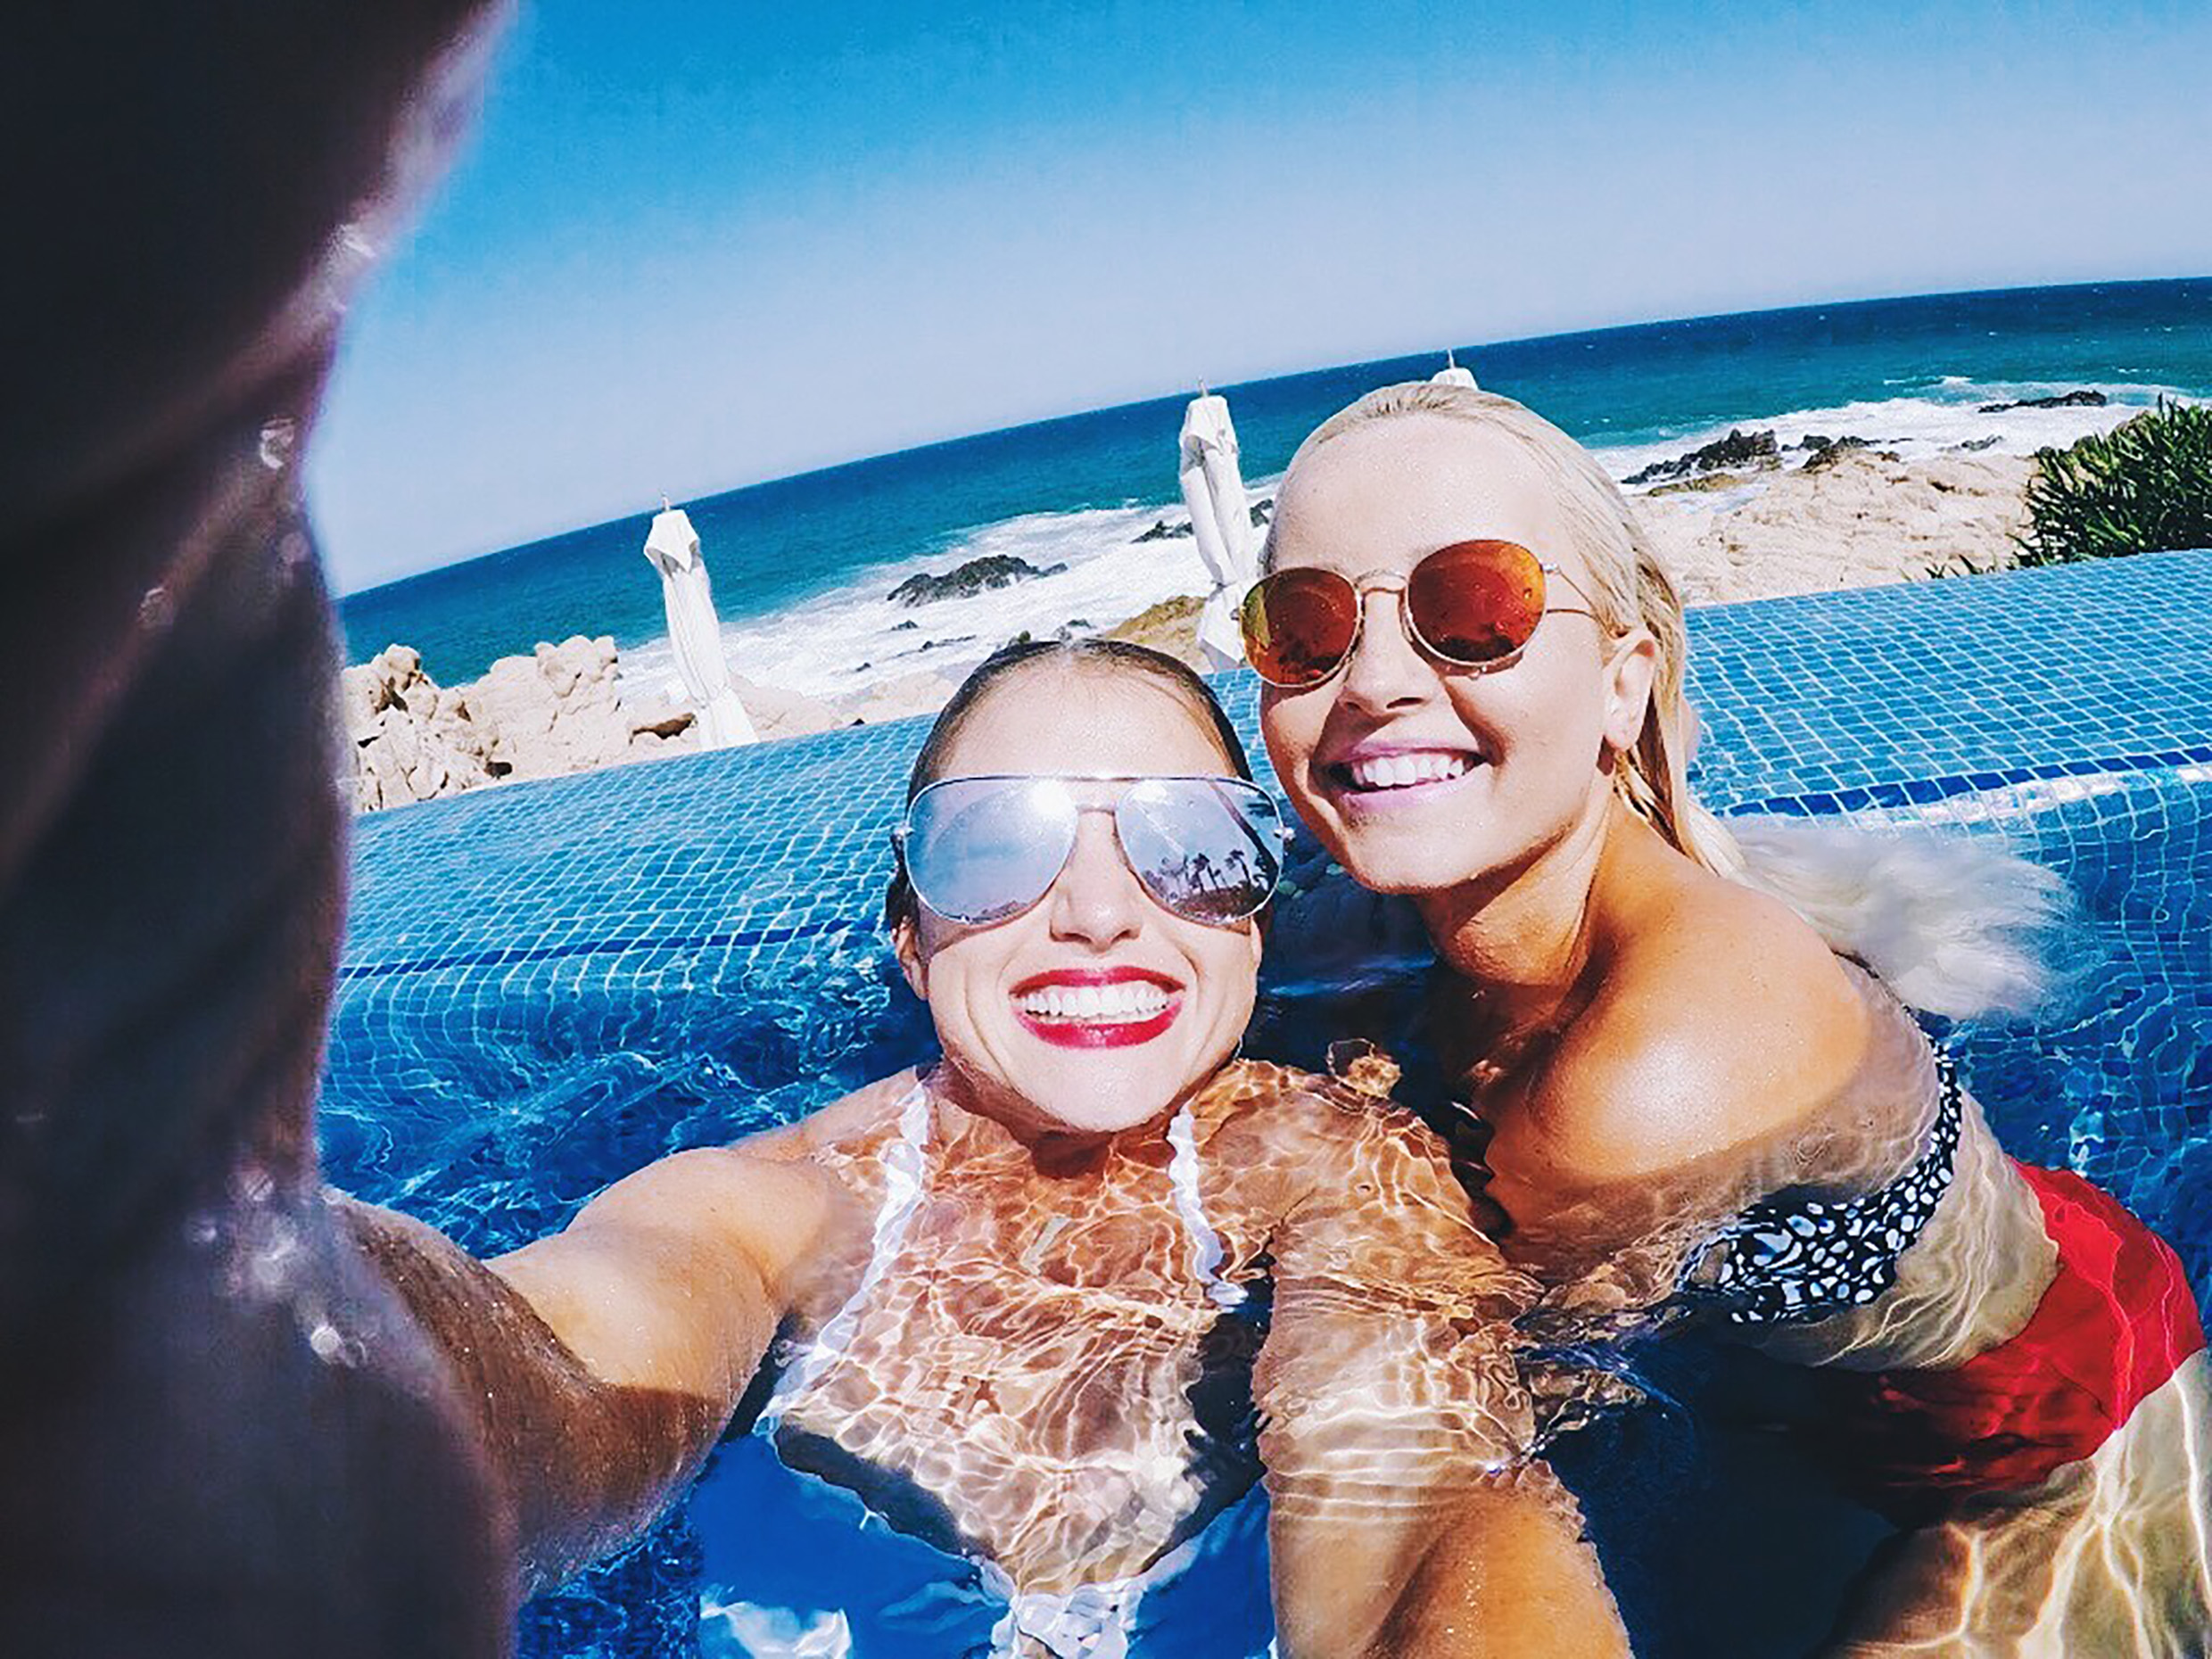 A VLOG OF OUR GIRLS TRIP TO CABO